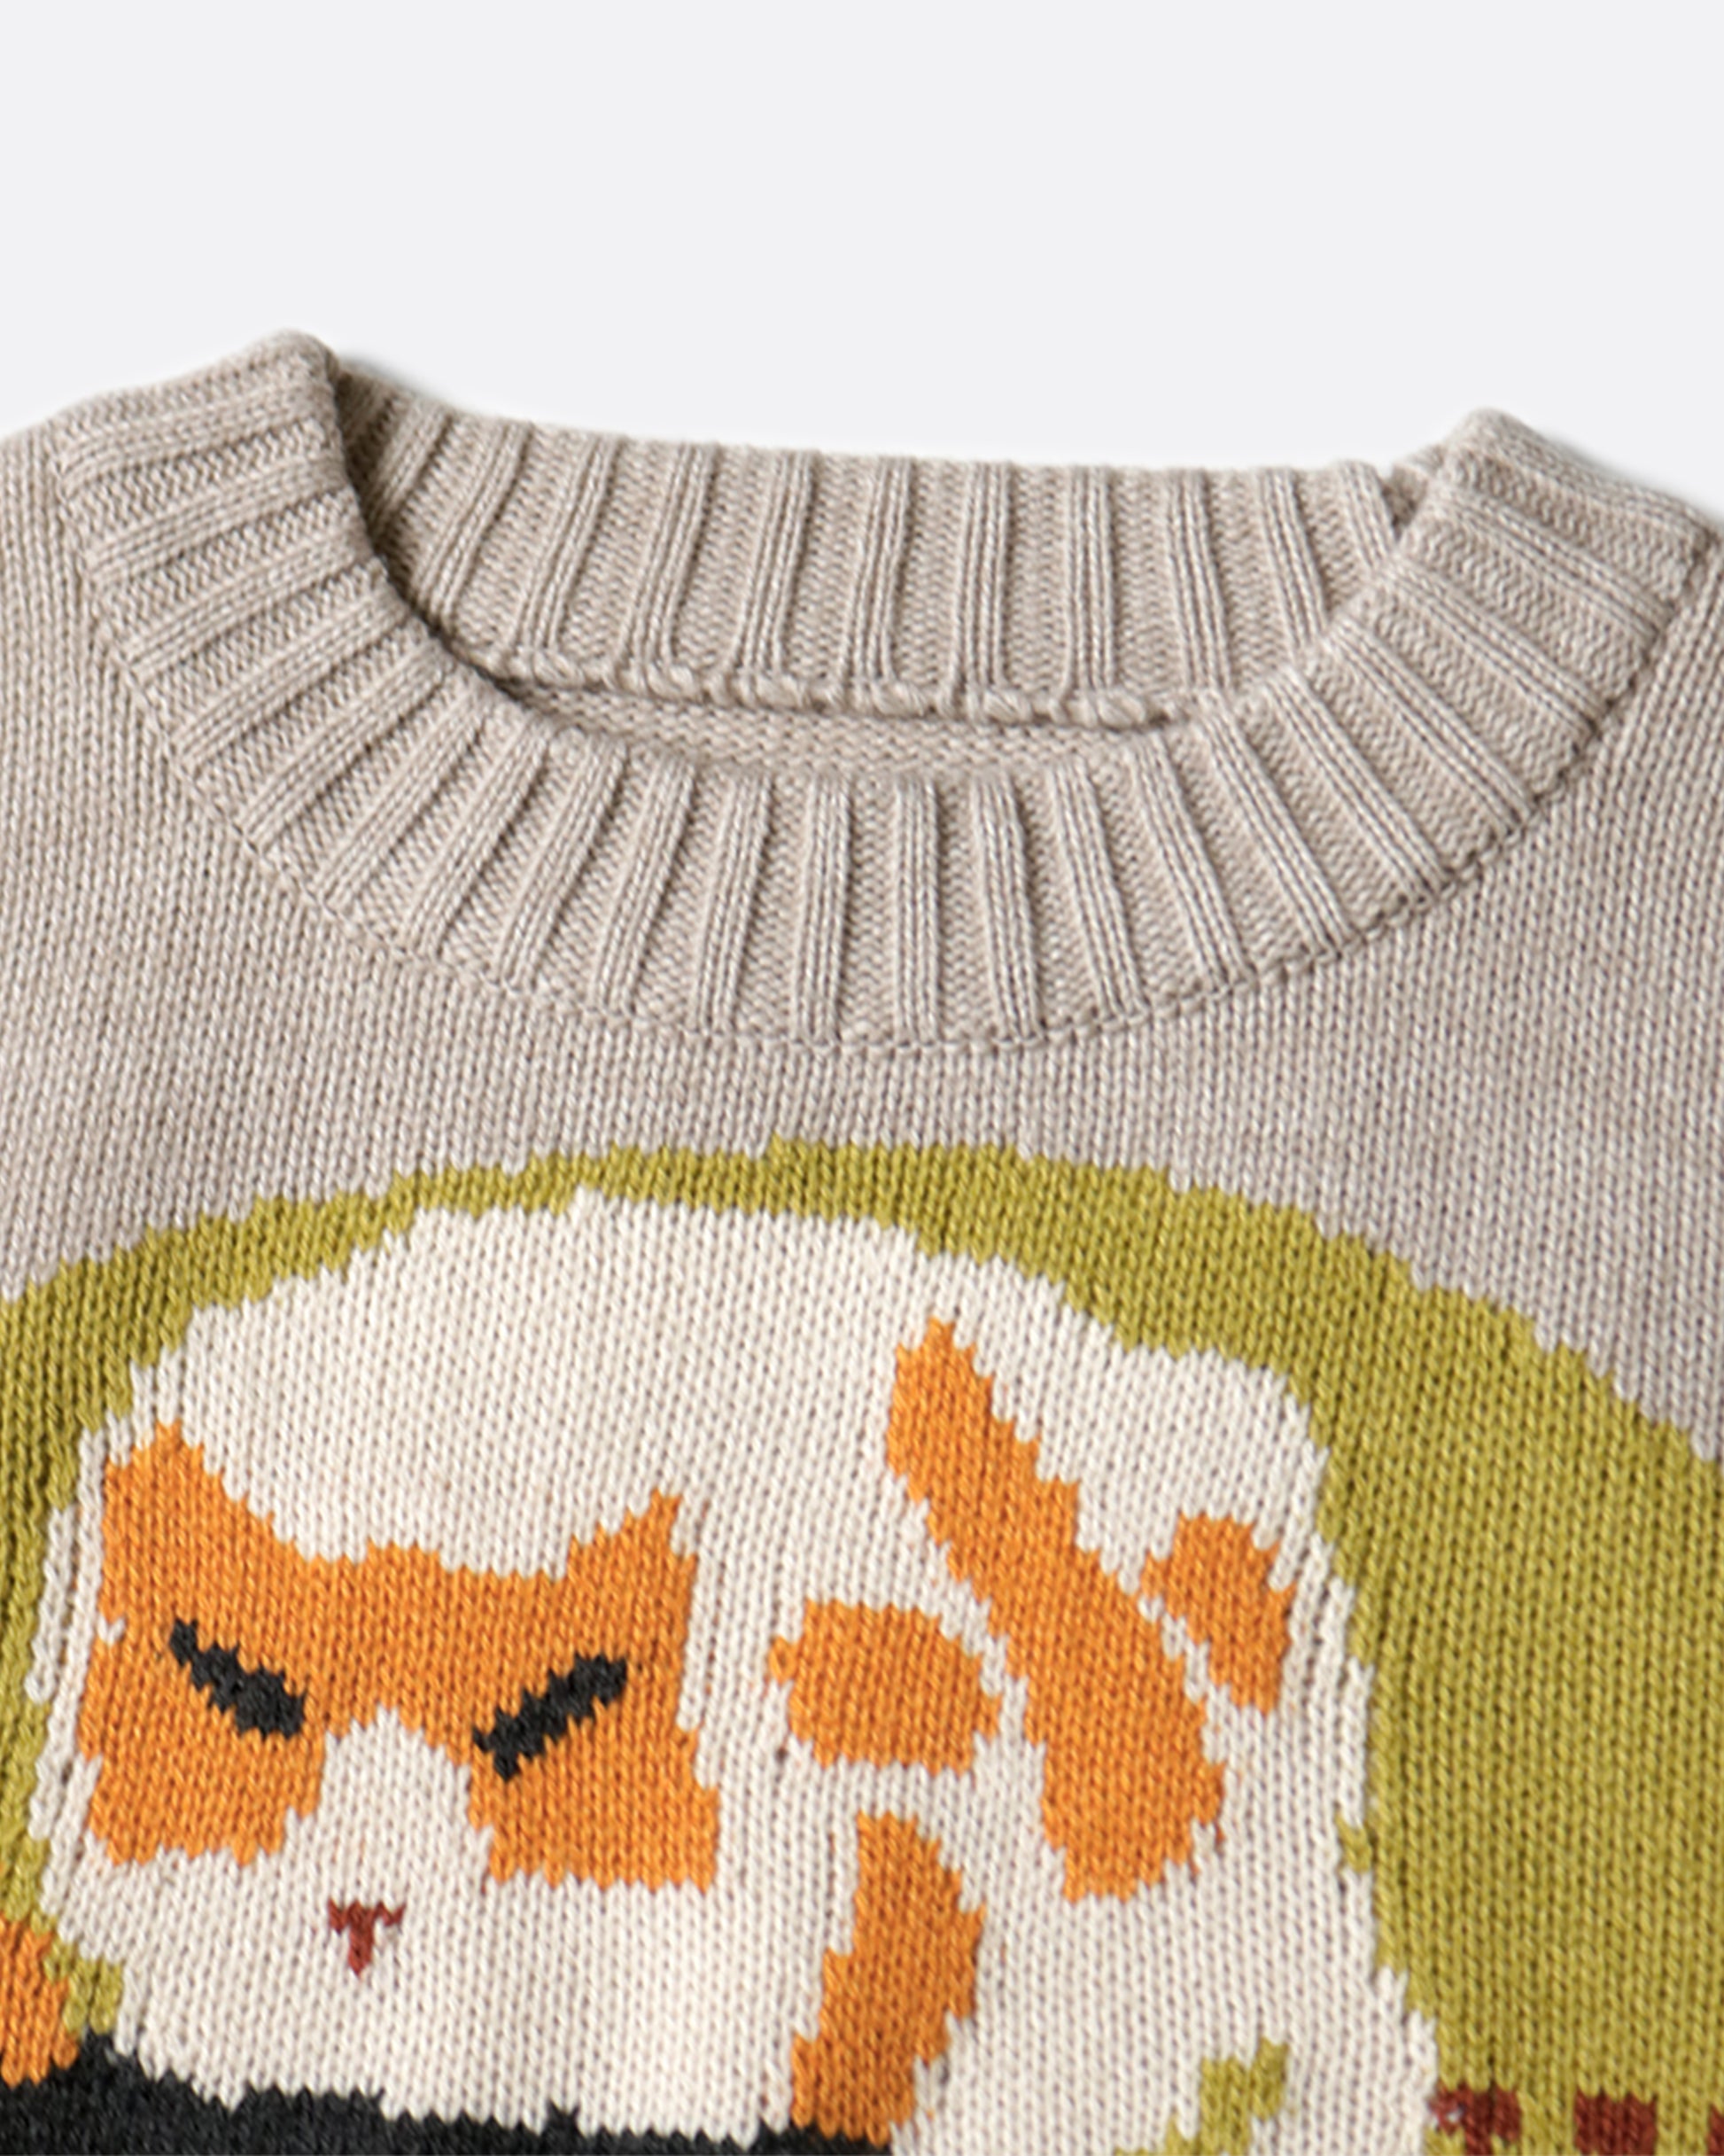 A 7g knit crewneck sweater with a design inspired by the Woodstock logo of 1969.